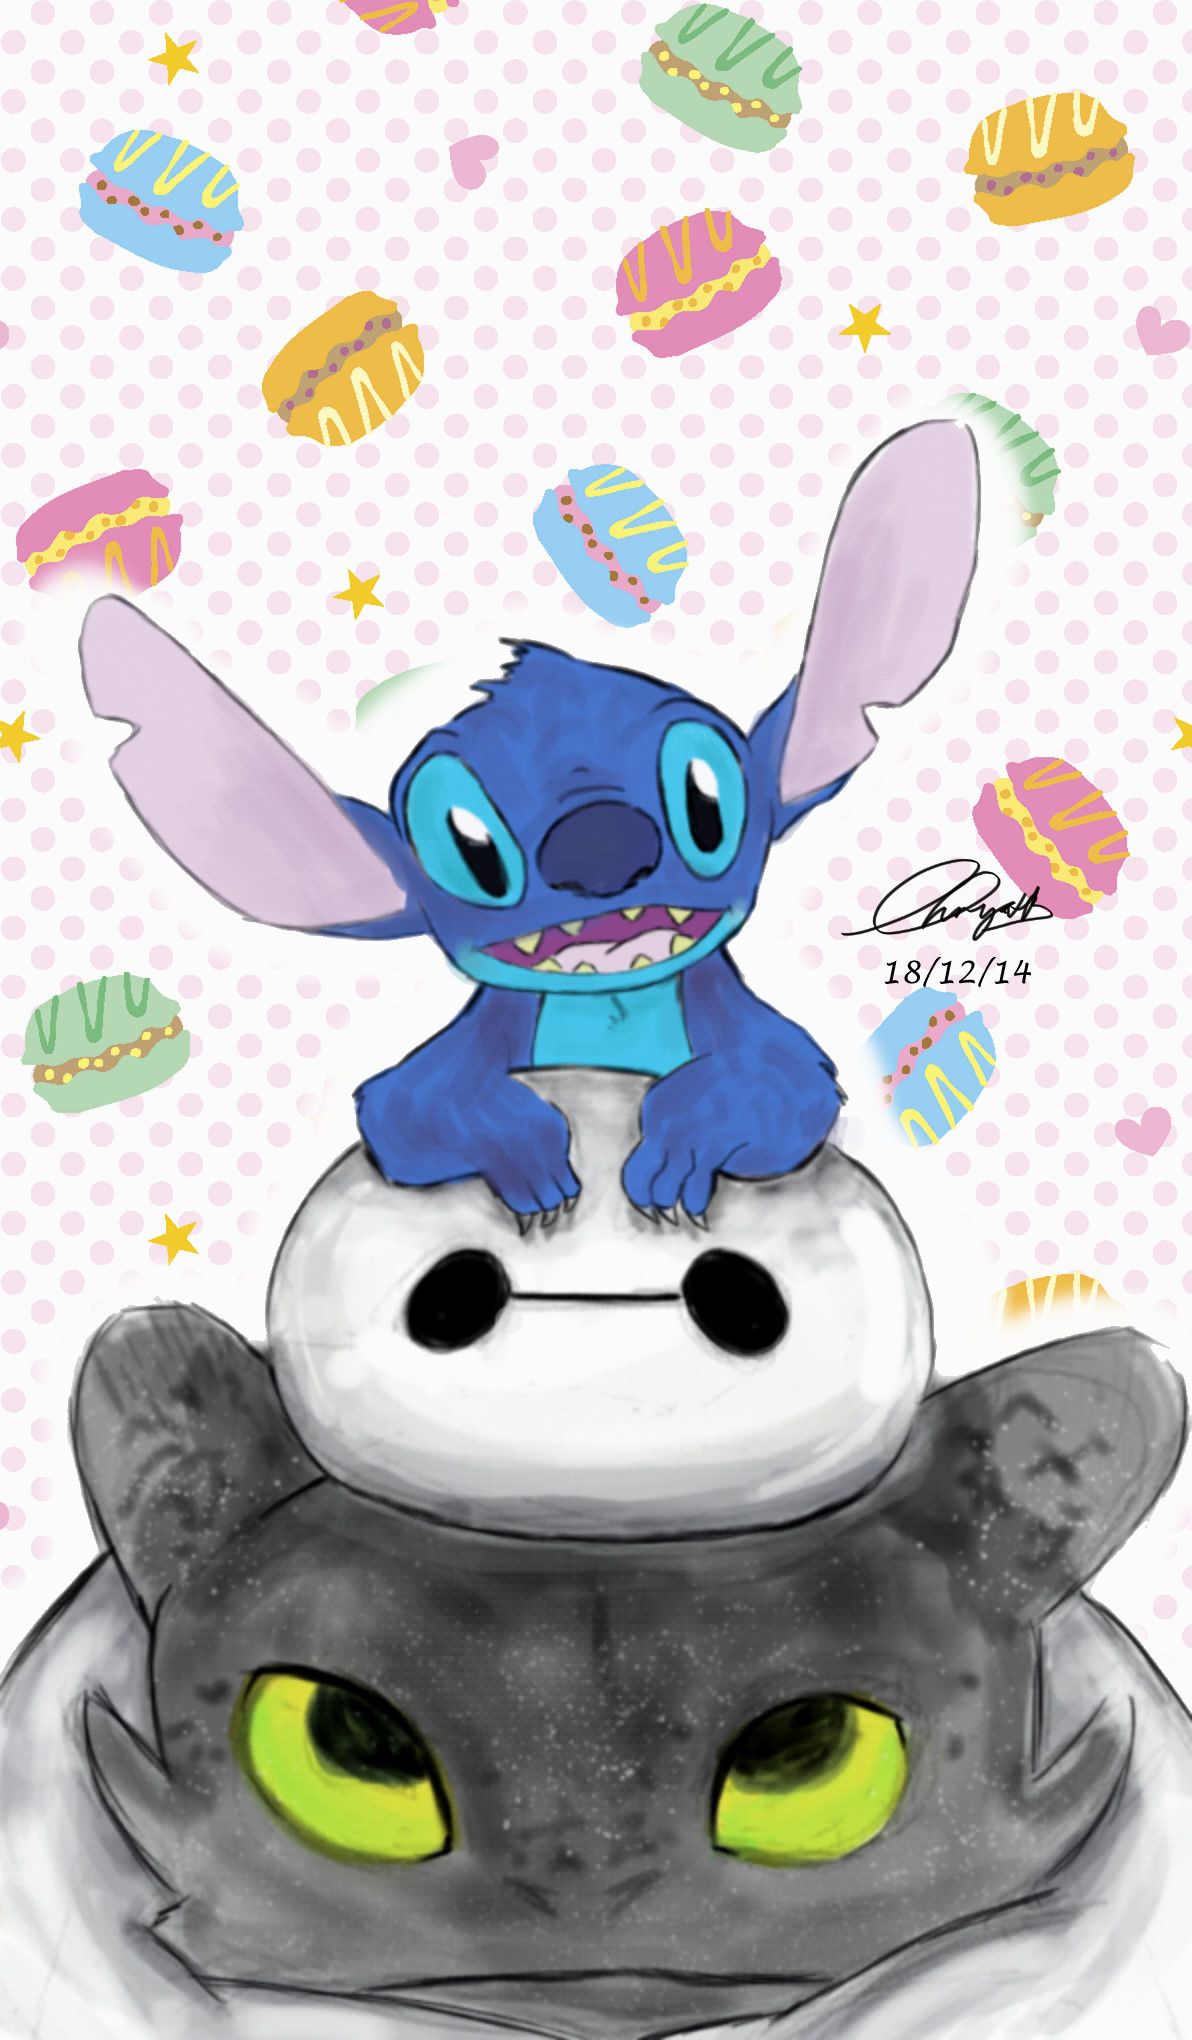 Toothless Stitch And Pikachu Wallpaper